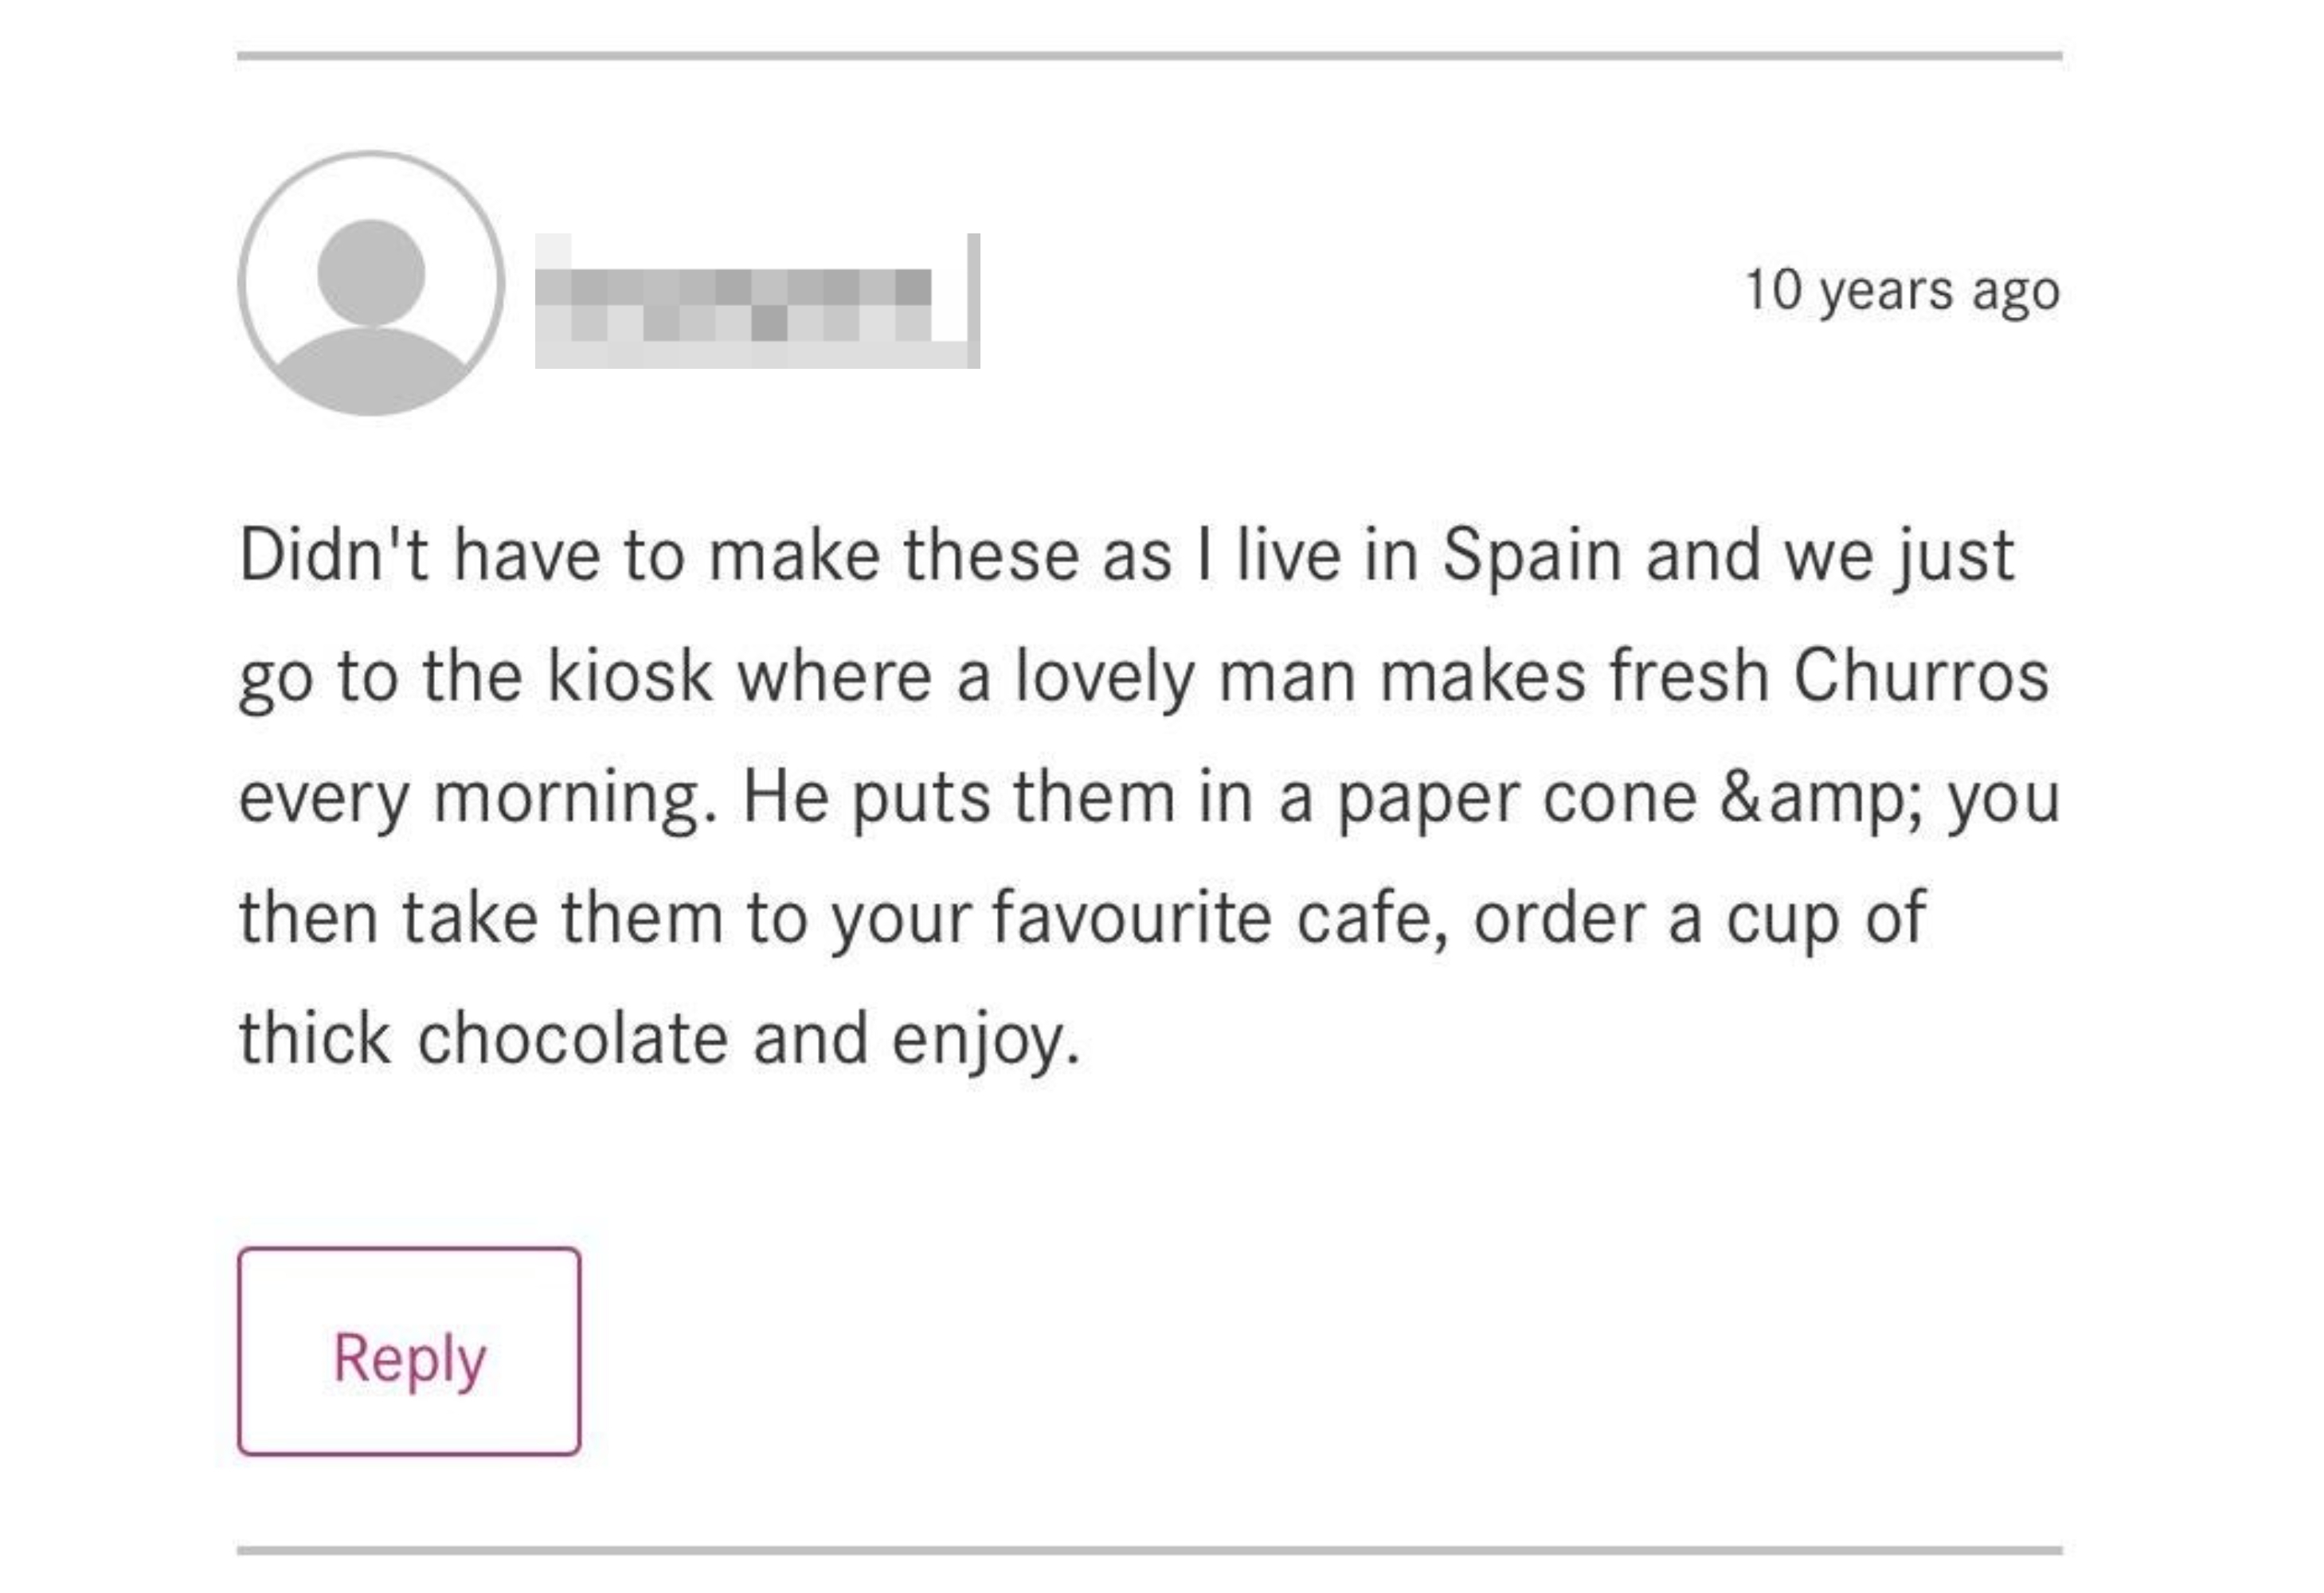 A review for homemade churros in which the reviewer admits/brags they don&#x27;t have to make it because they can just get theirs from a kiosk where they live in Spain, where &quot;a lovely man makes fresh churros every morning&quot;